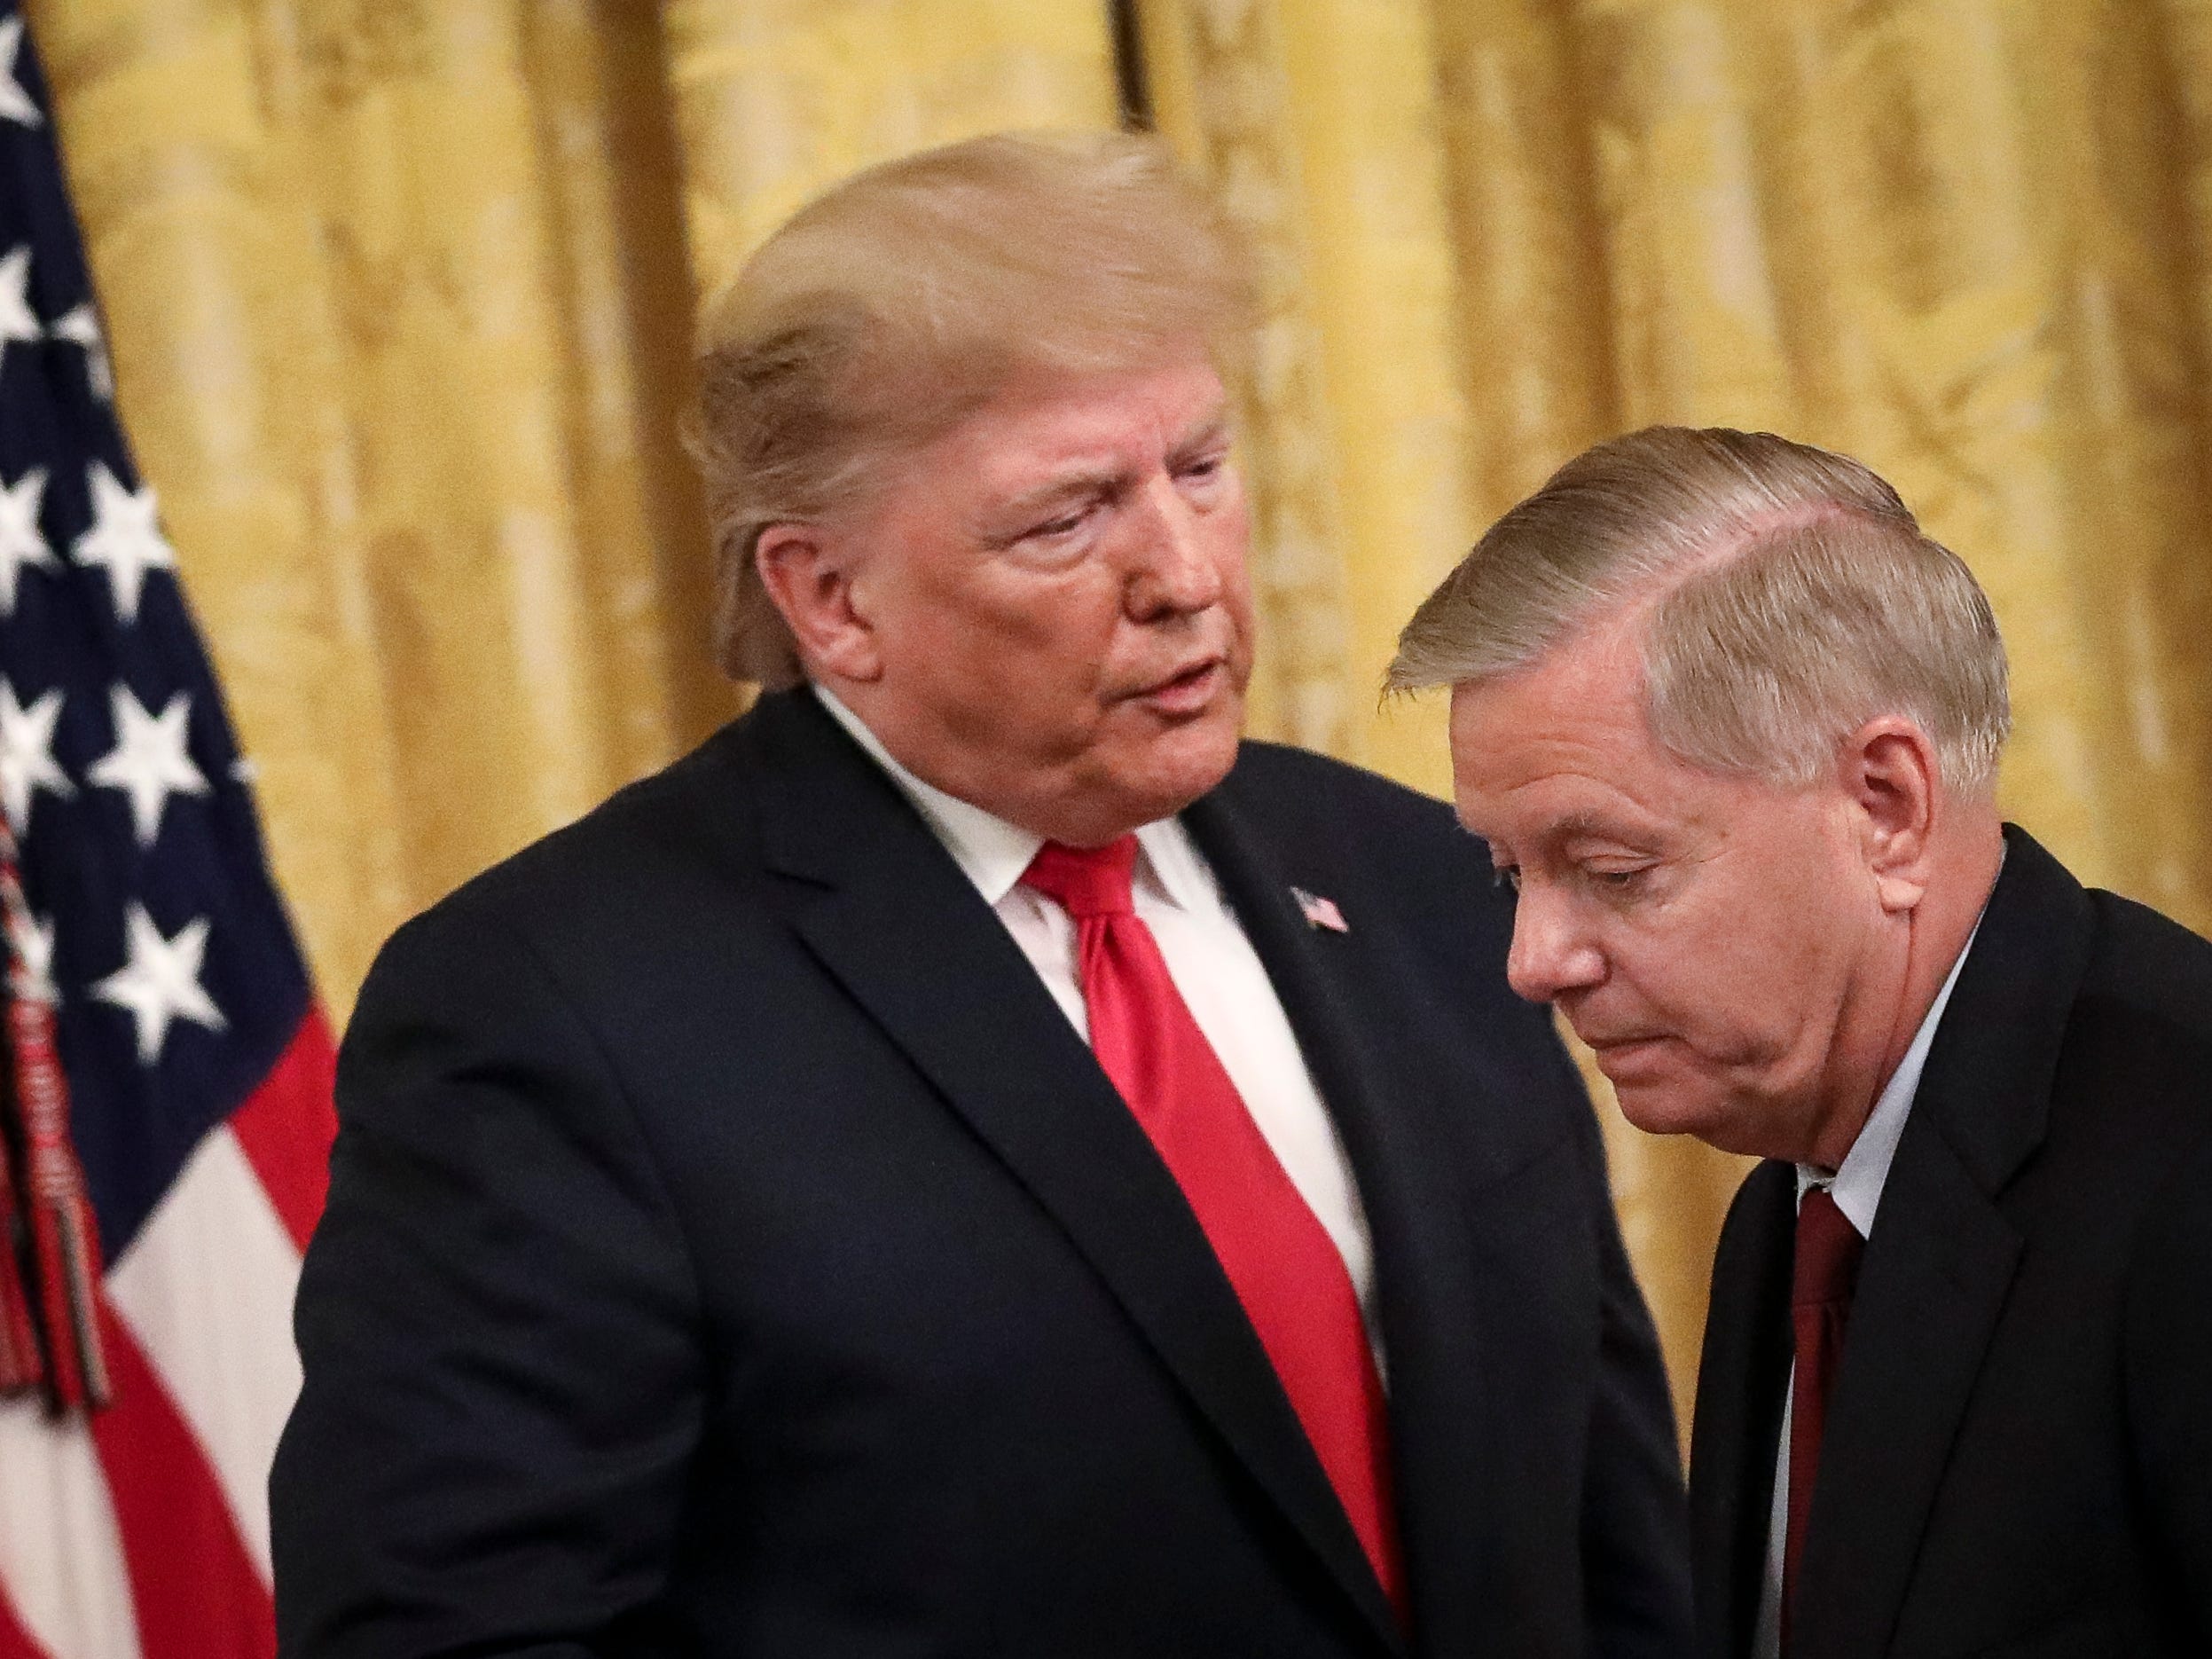 Former President Donald Trump speaks to Sen. Lindsey Graham (R-SC) during an event in the East Room of the White House on November 6, 2019.